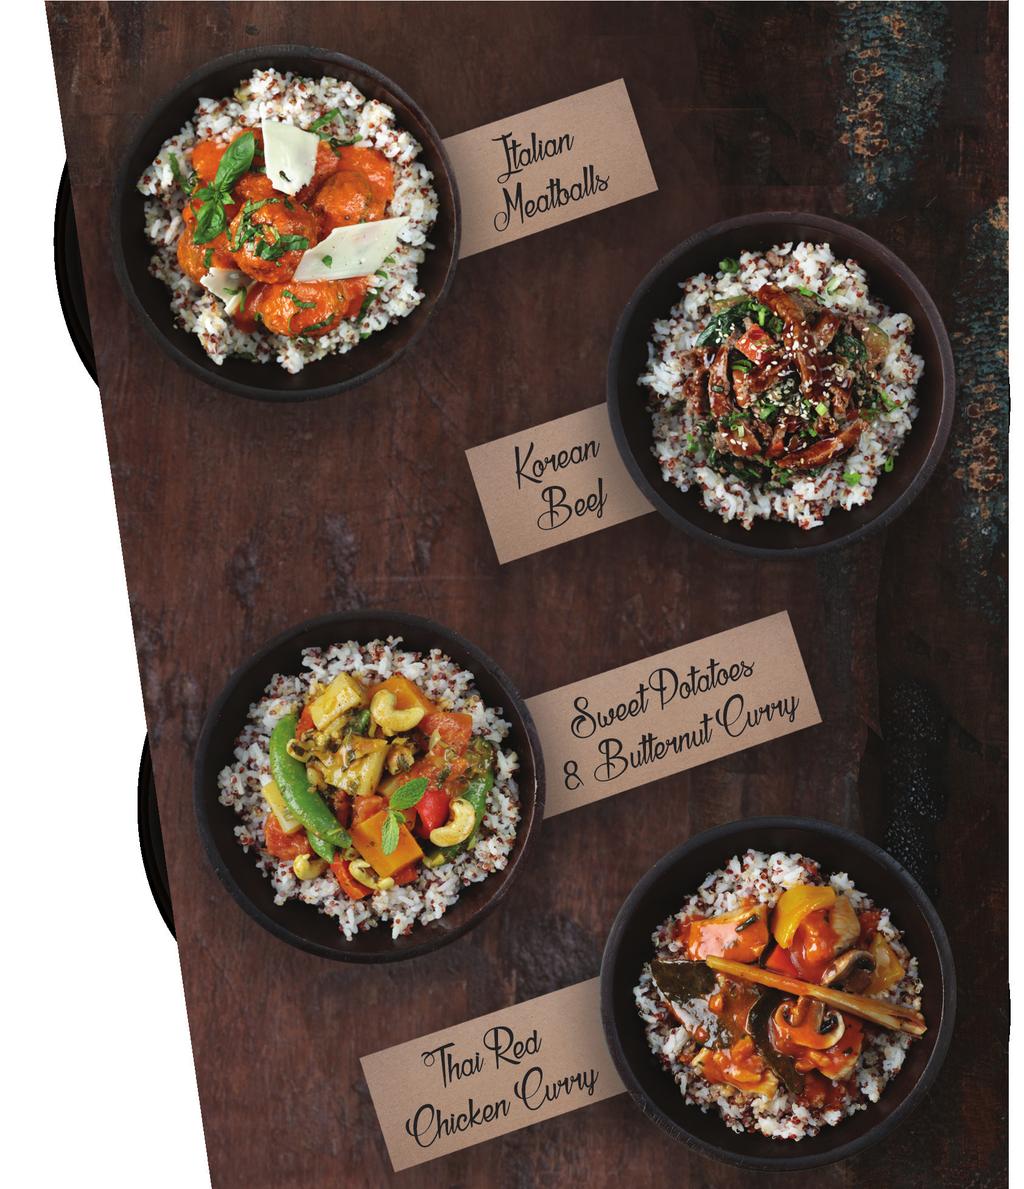 Hot Pots Soups Guilt free, healthy bowls of goodness. Made fresh, every day! Served in a mixture of organic quinoa & rice.